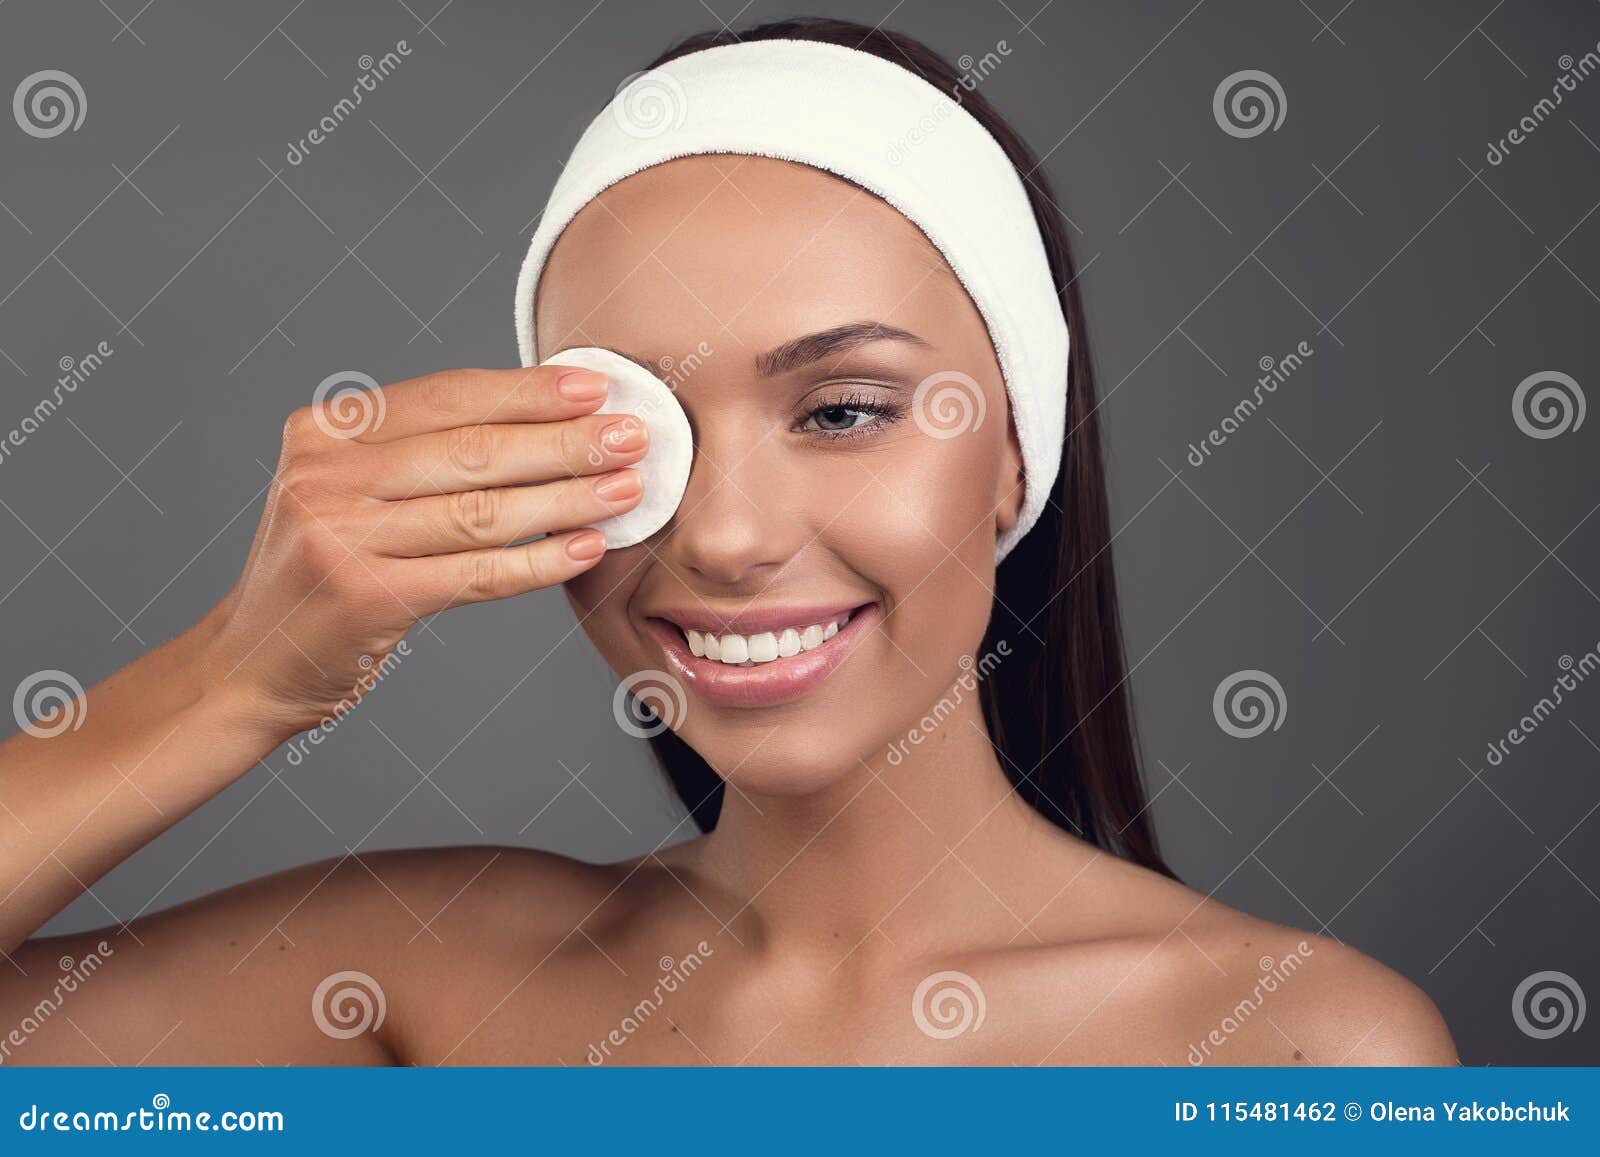 well cared girl using makeup remover